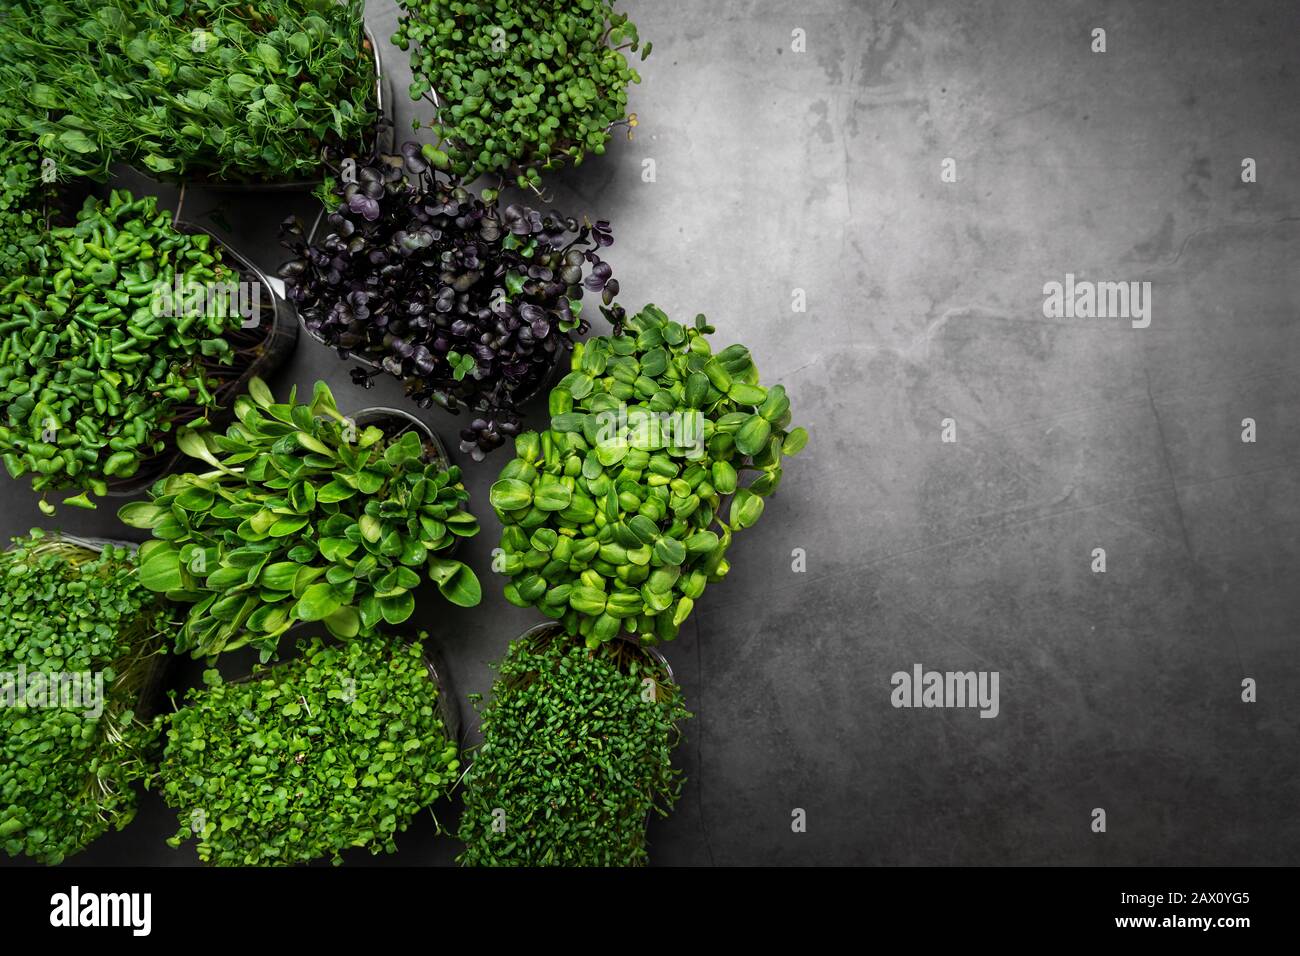 mix of microgreens containers on black stone background with copy space Stock Photo